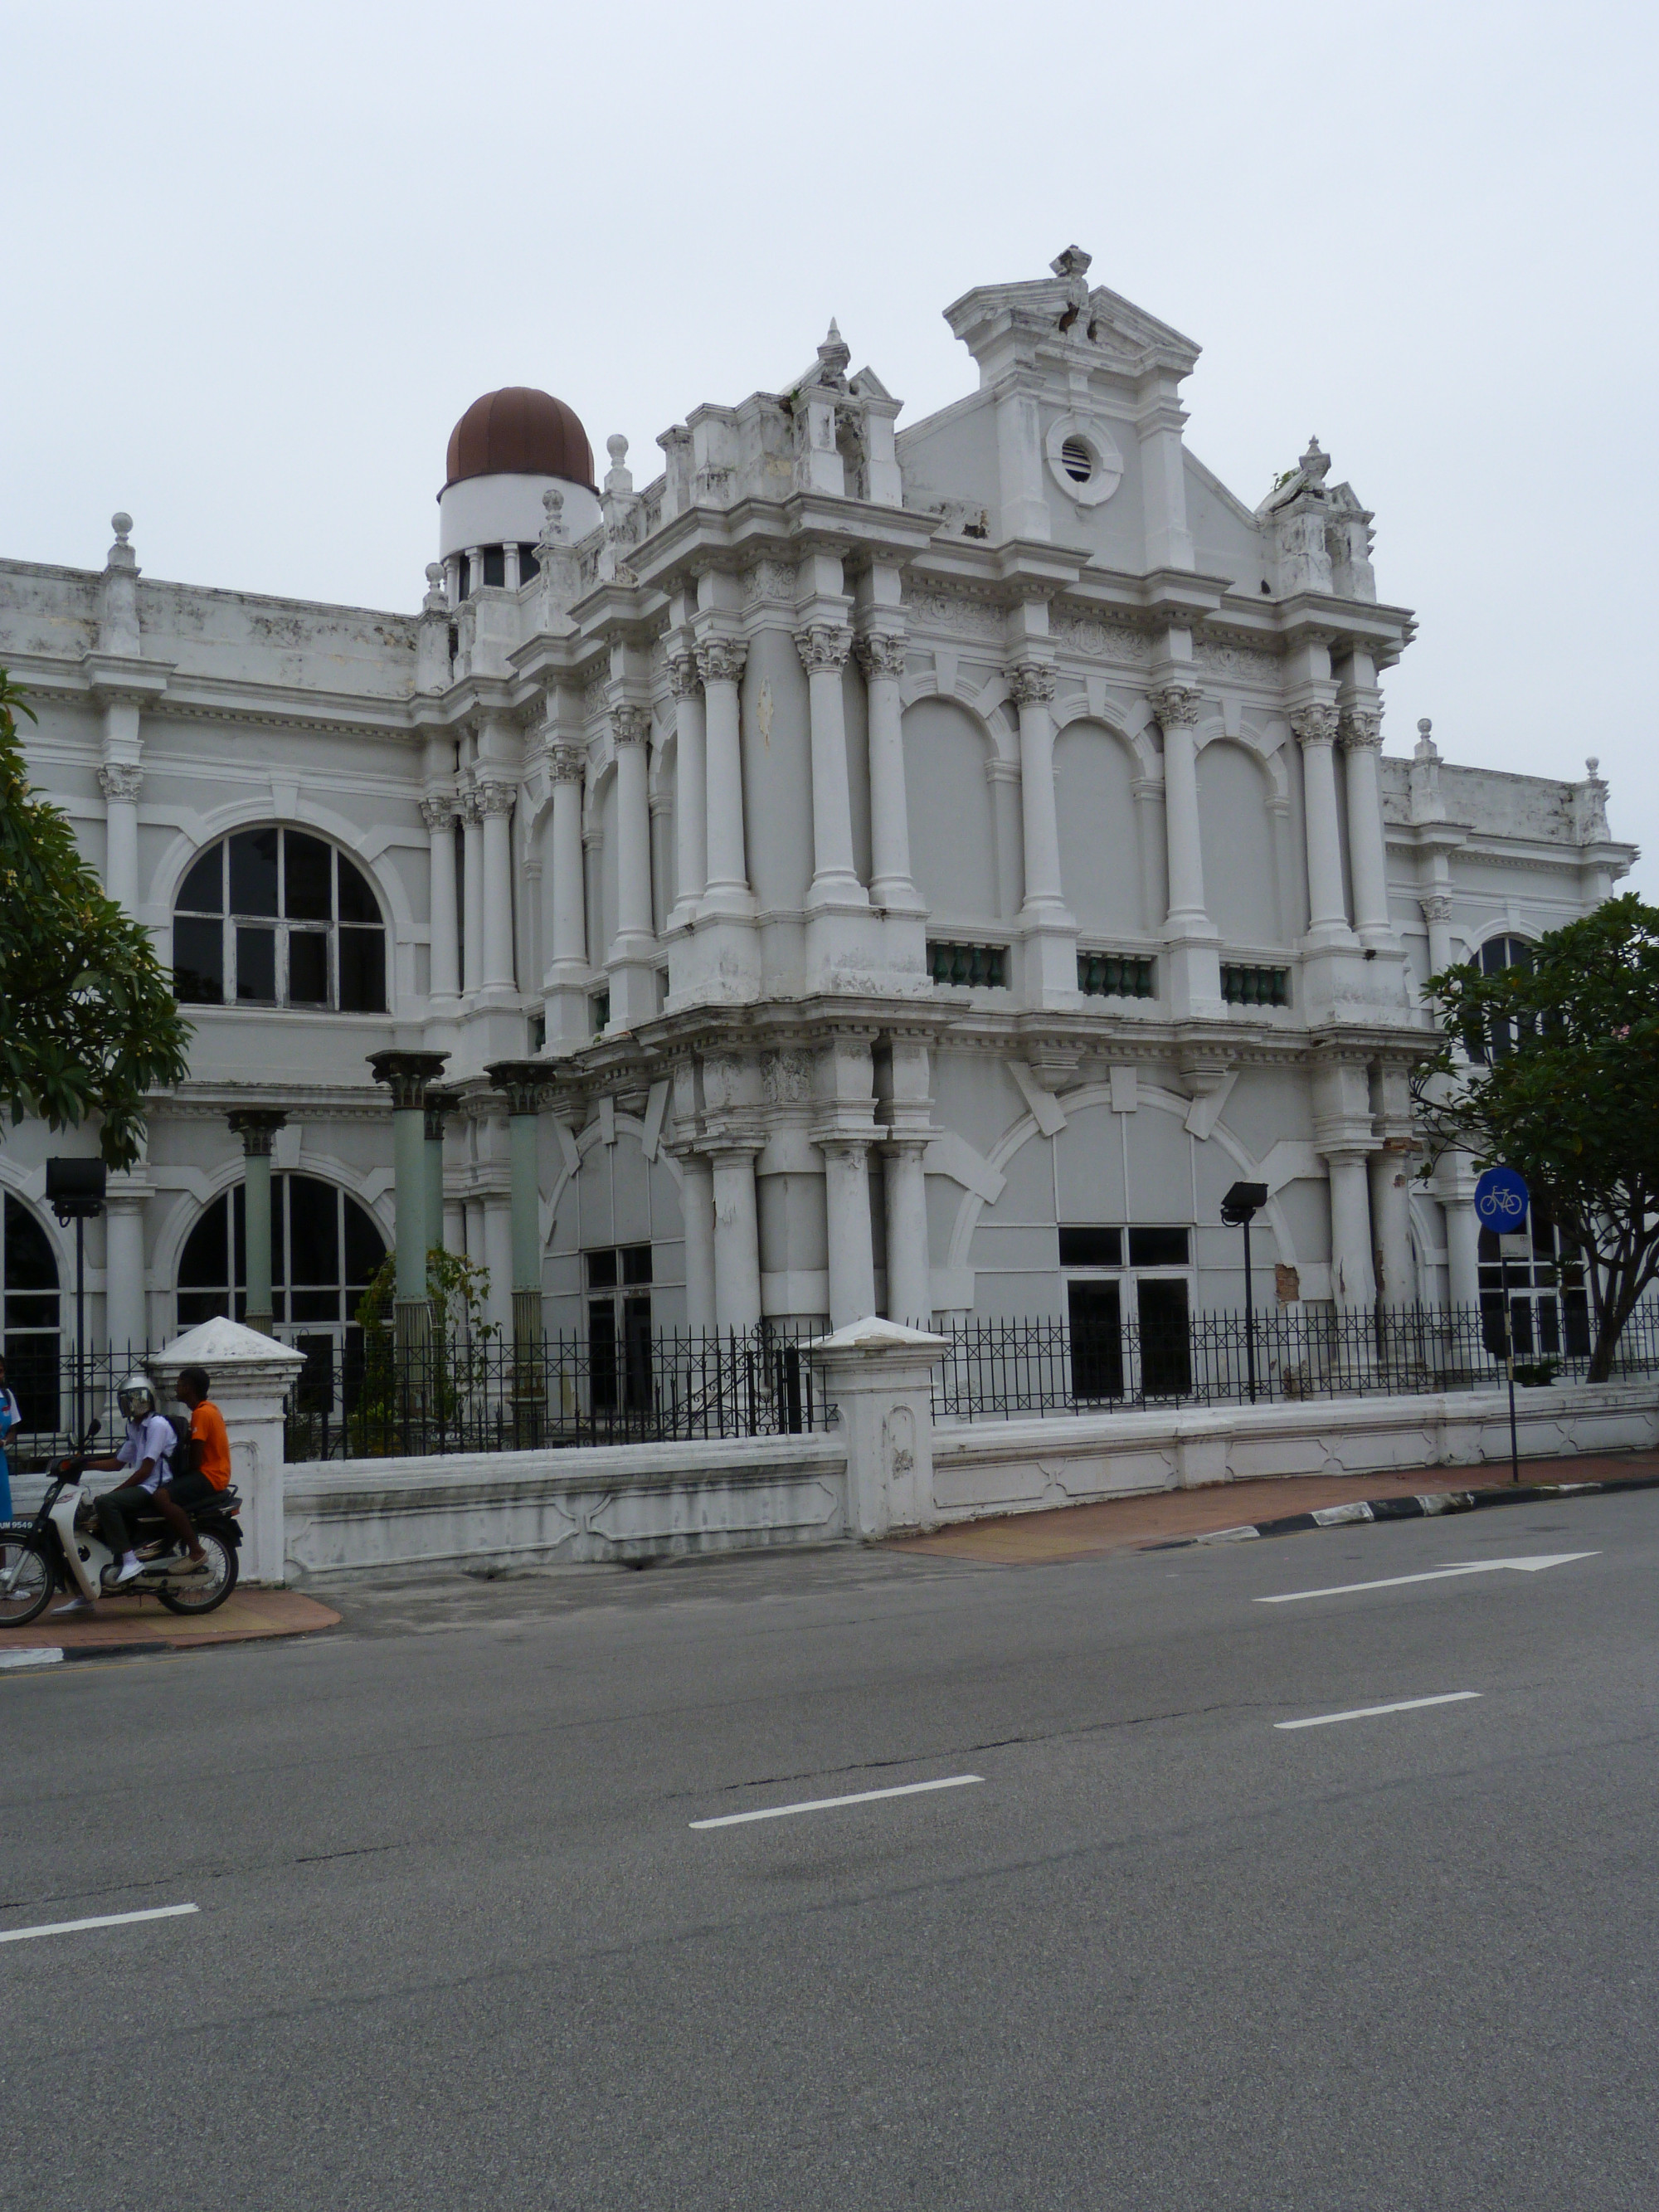 Penang State Museum and Art Gallery